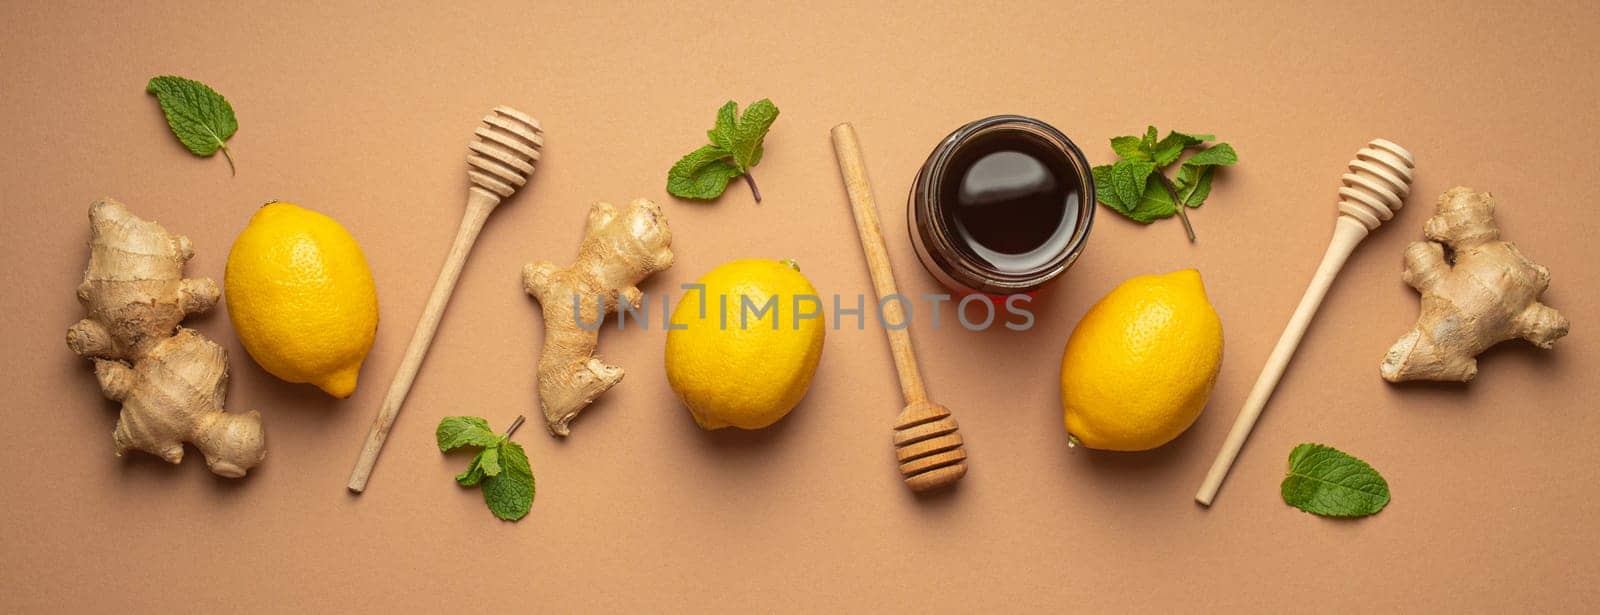 Composition with lemons, mint, ginger, honey in glass jar and honey wooden dippers top view. Food for immunity stimulation and against seasonal flu. Healthy natural remedies to boost immune system.